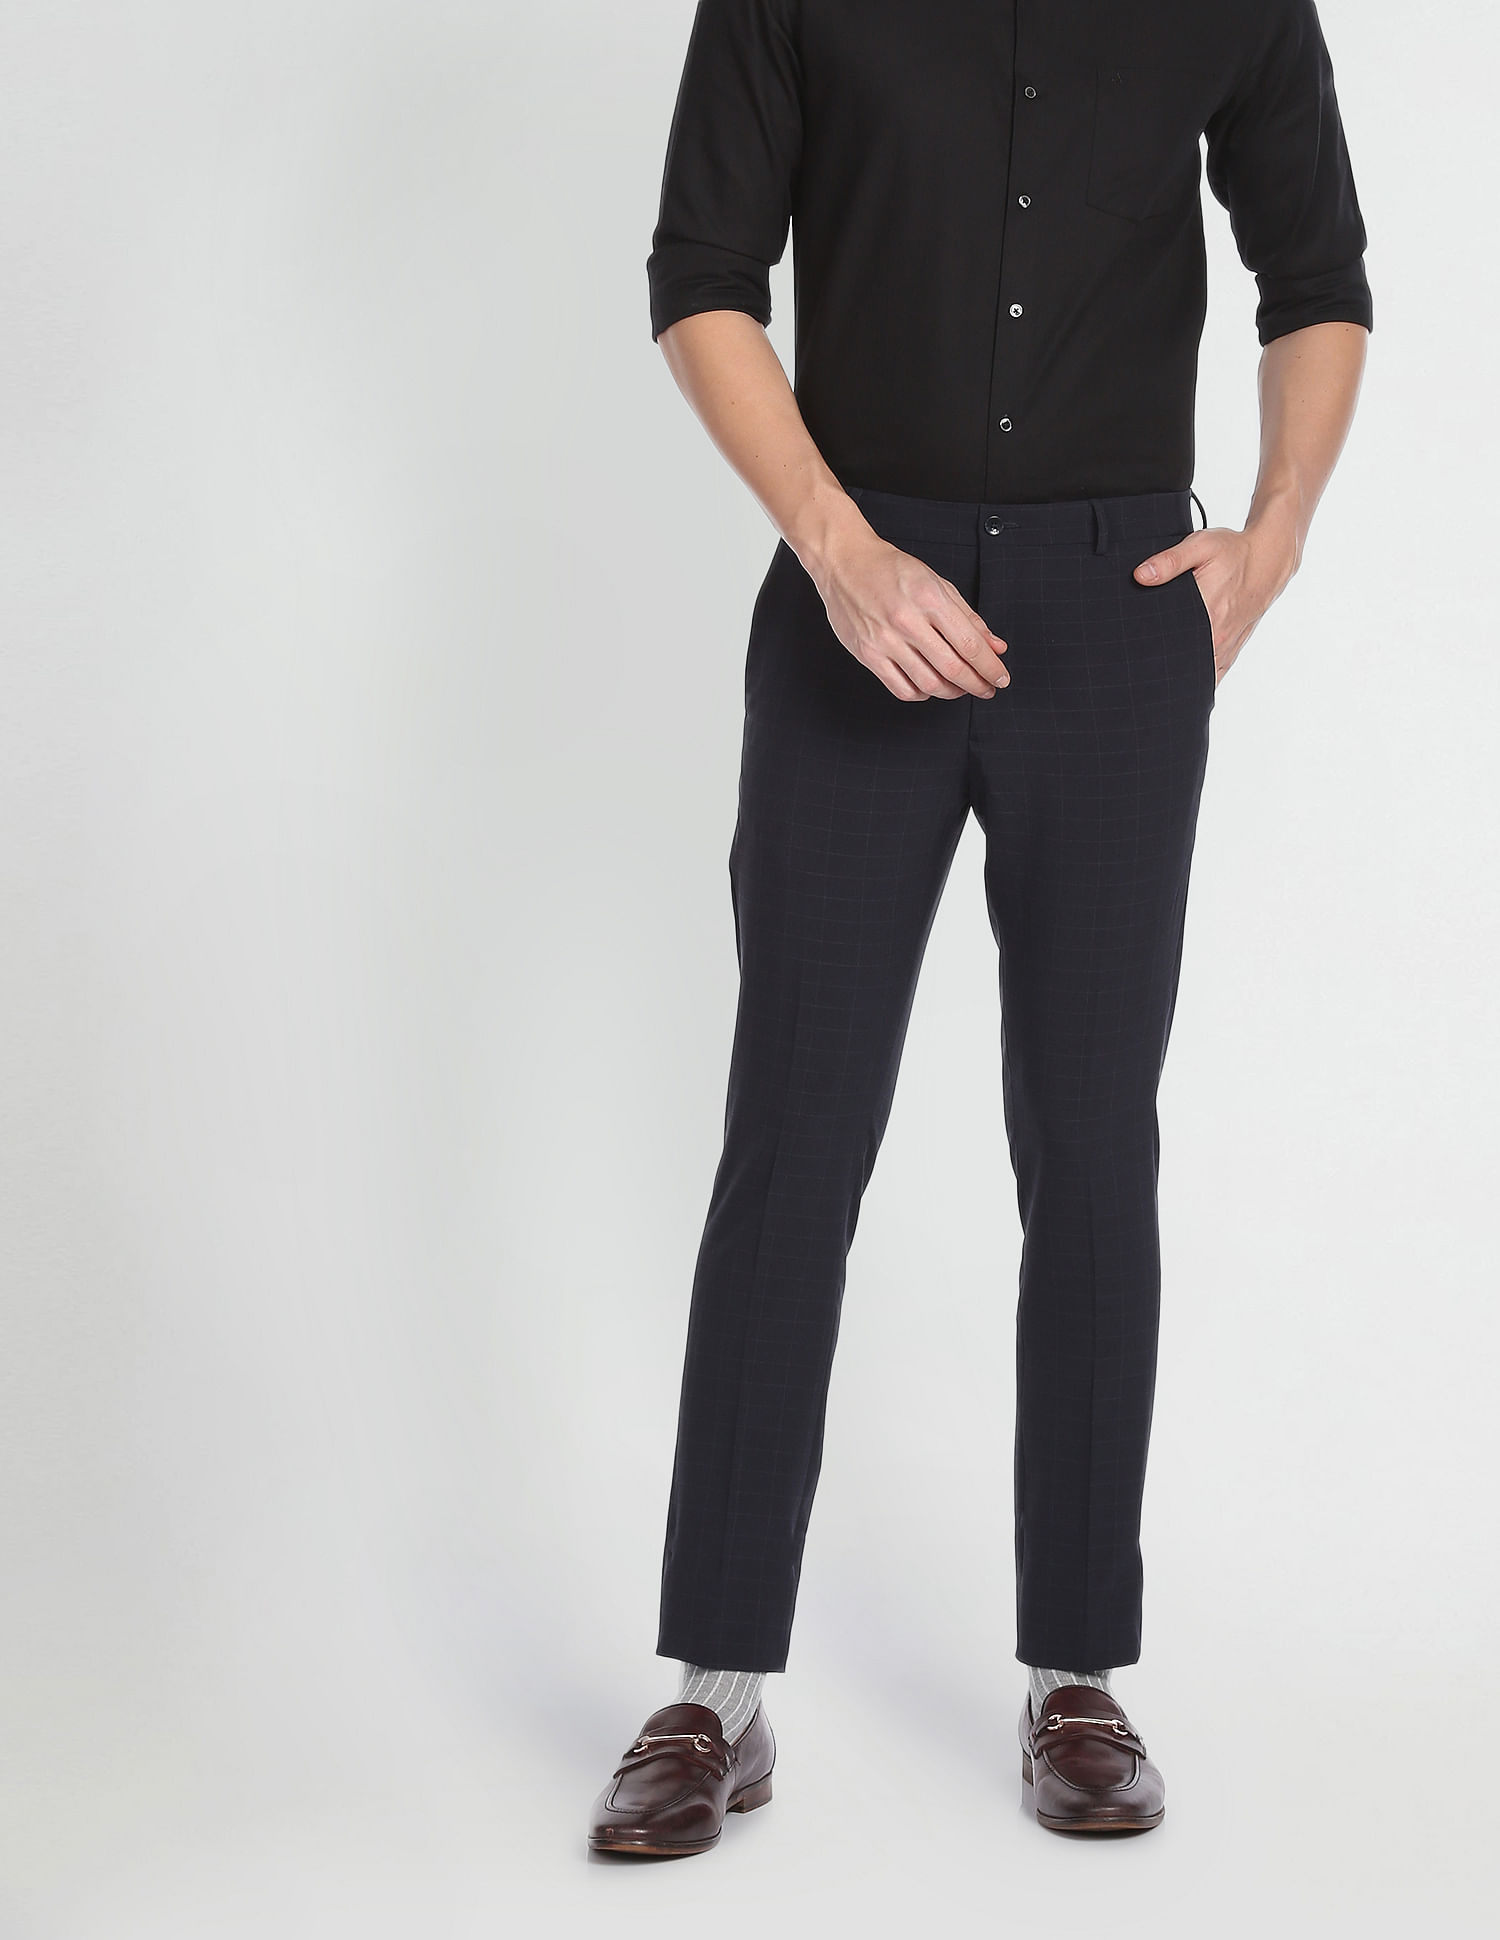 Buy Raymond Formal Trousers Online At Best Price Offers In India